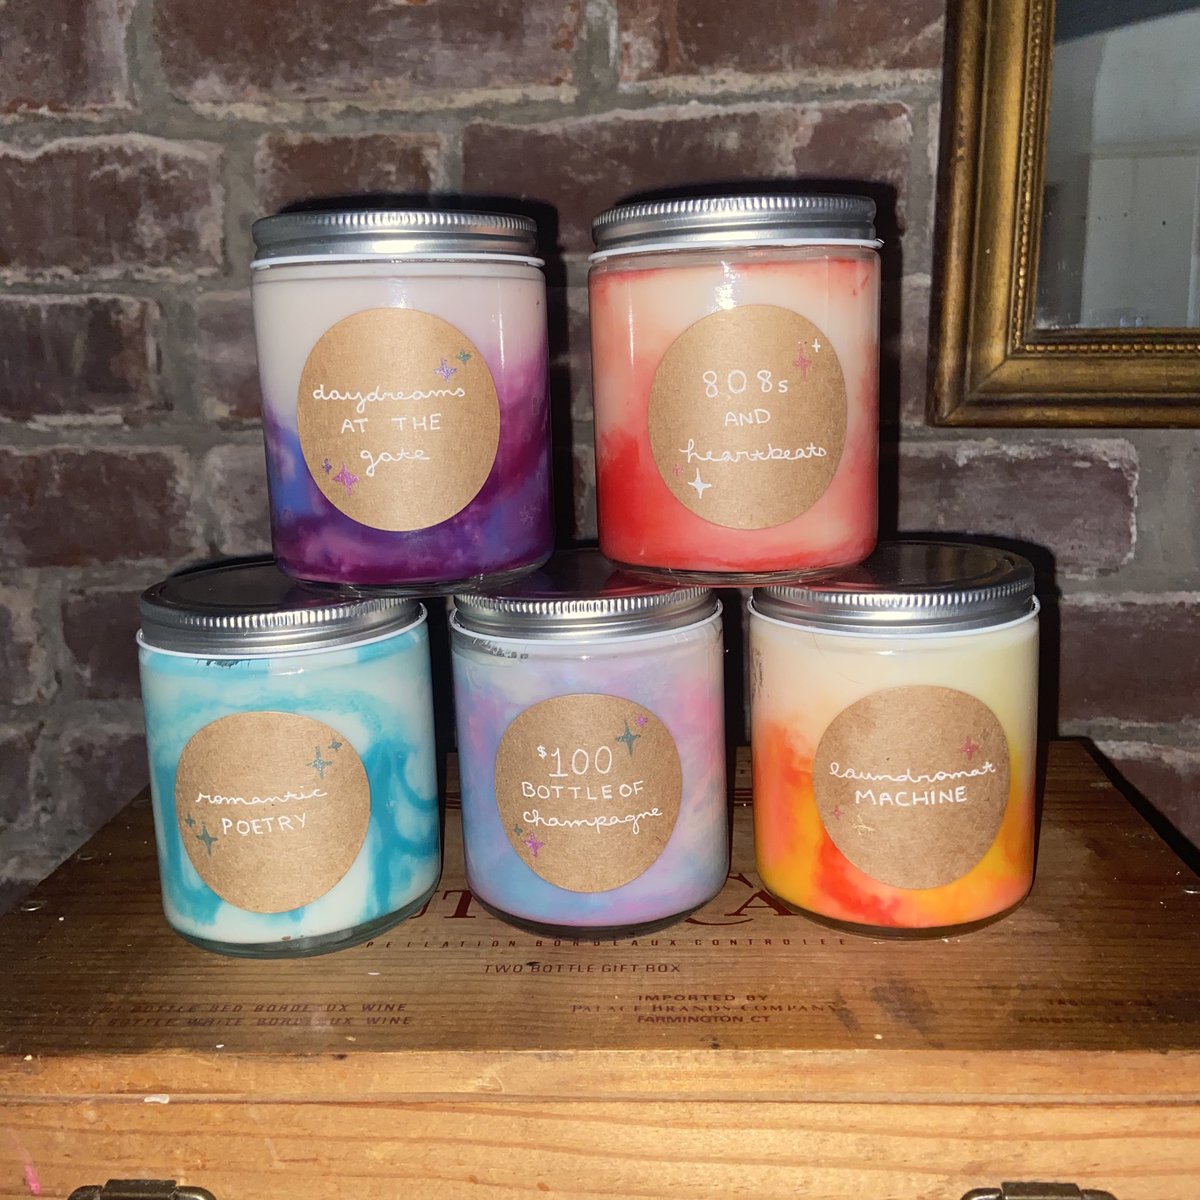 THREAD OF THE SCENTS OF EACH CANDLE  